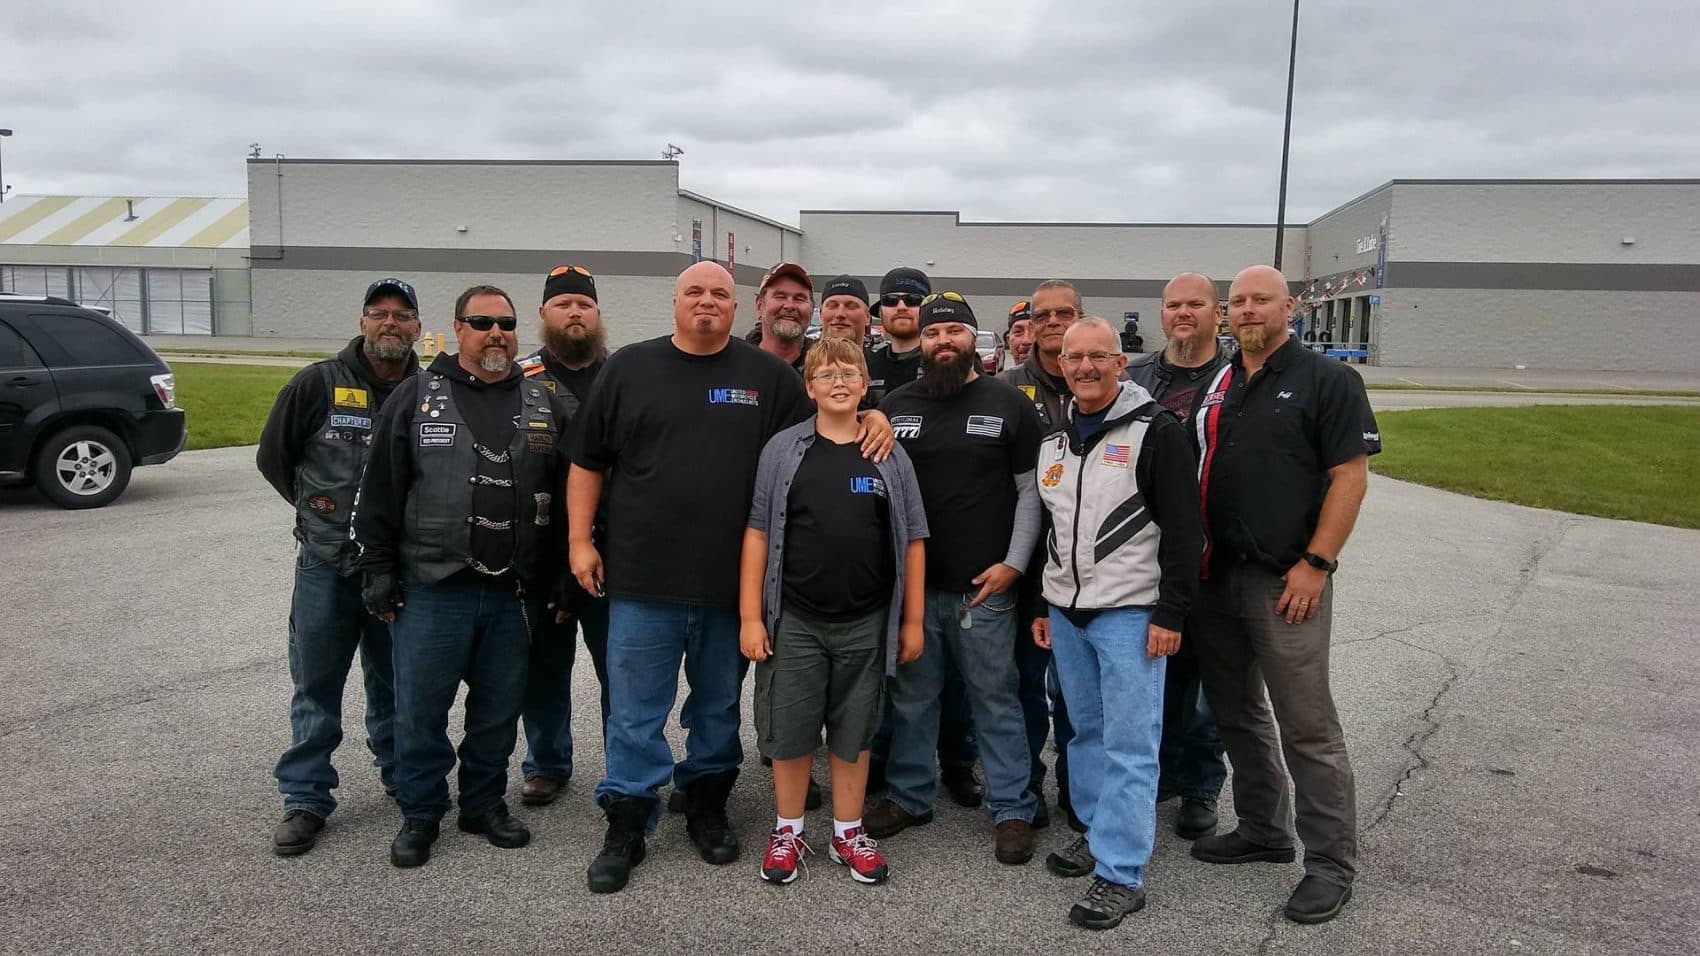 Phil Mick, center, with Brent Warfield, fourth from left, and other bikers who came to escort him to school. (Courtesy of Brent Warfield)